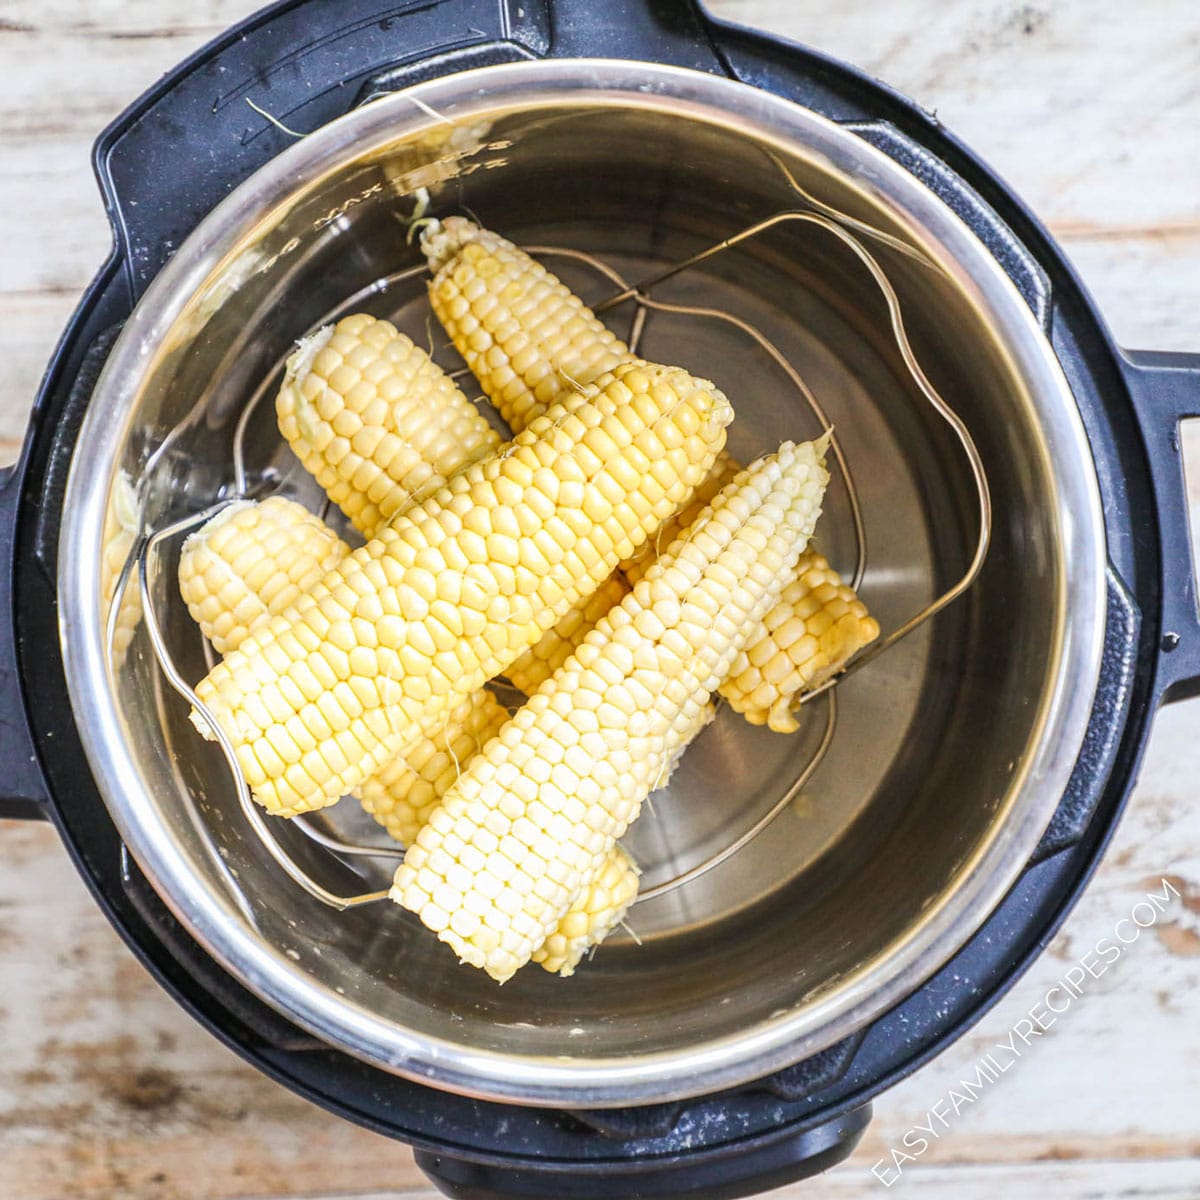 3 Minute Instant Pot Corn on the Cob with Garlic Butter